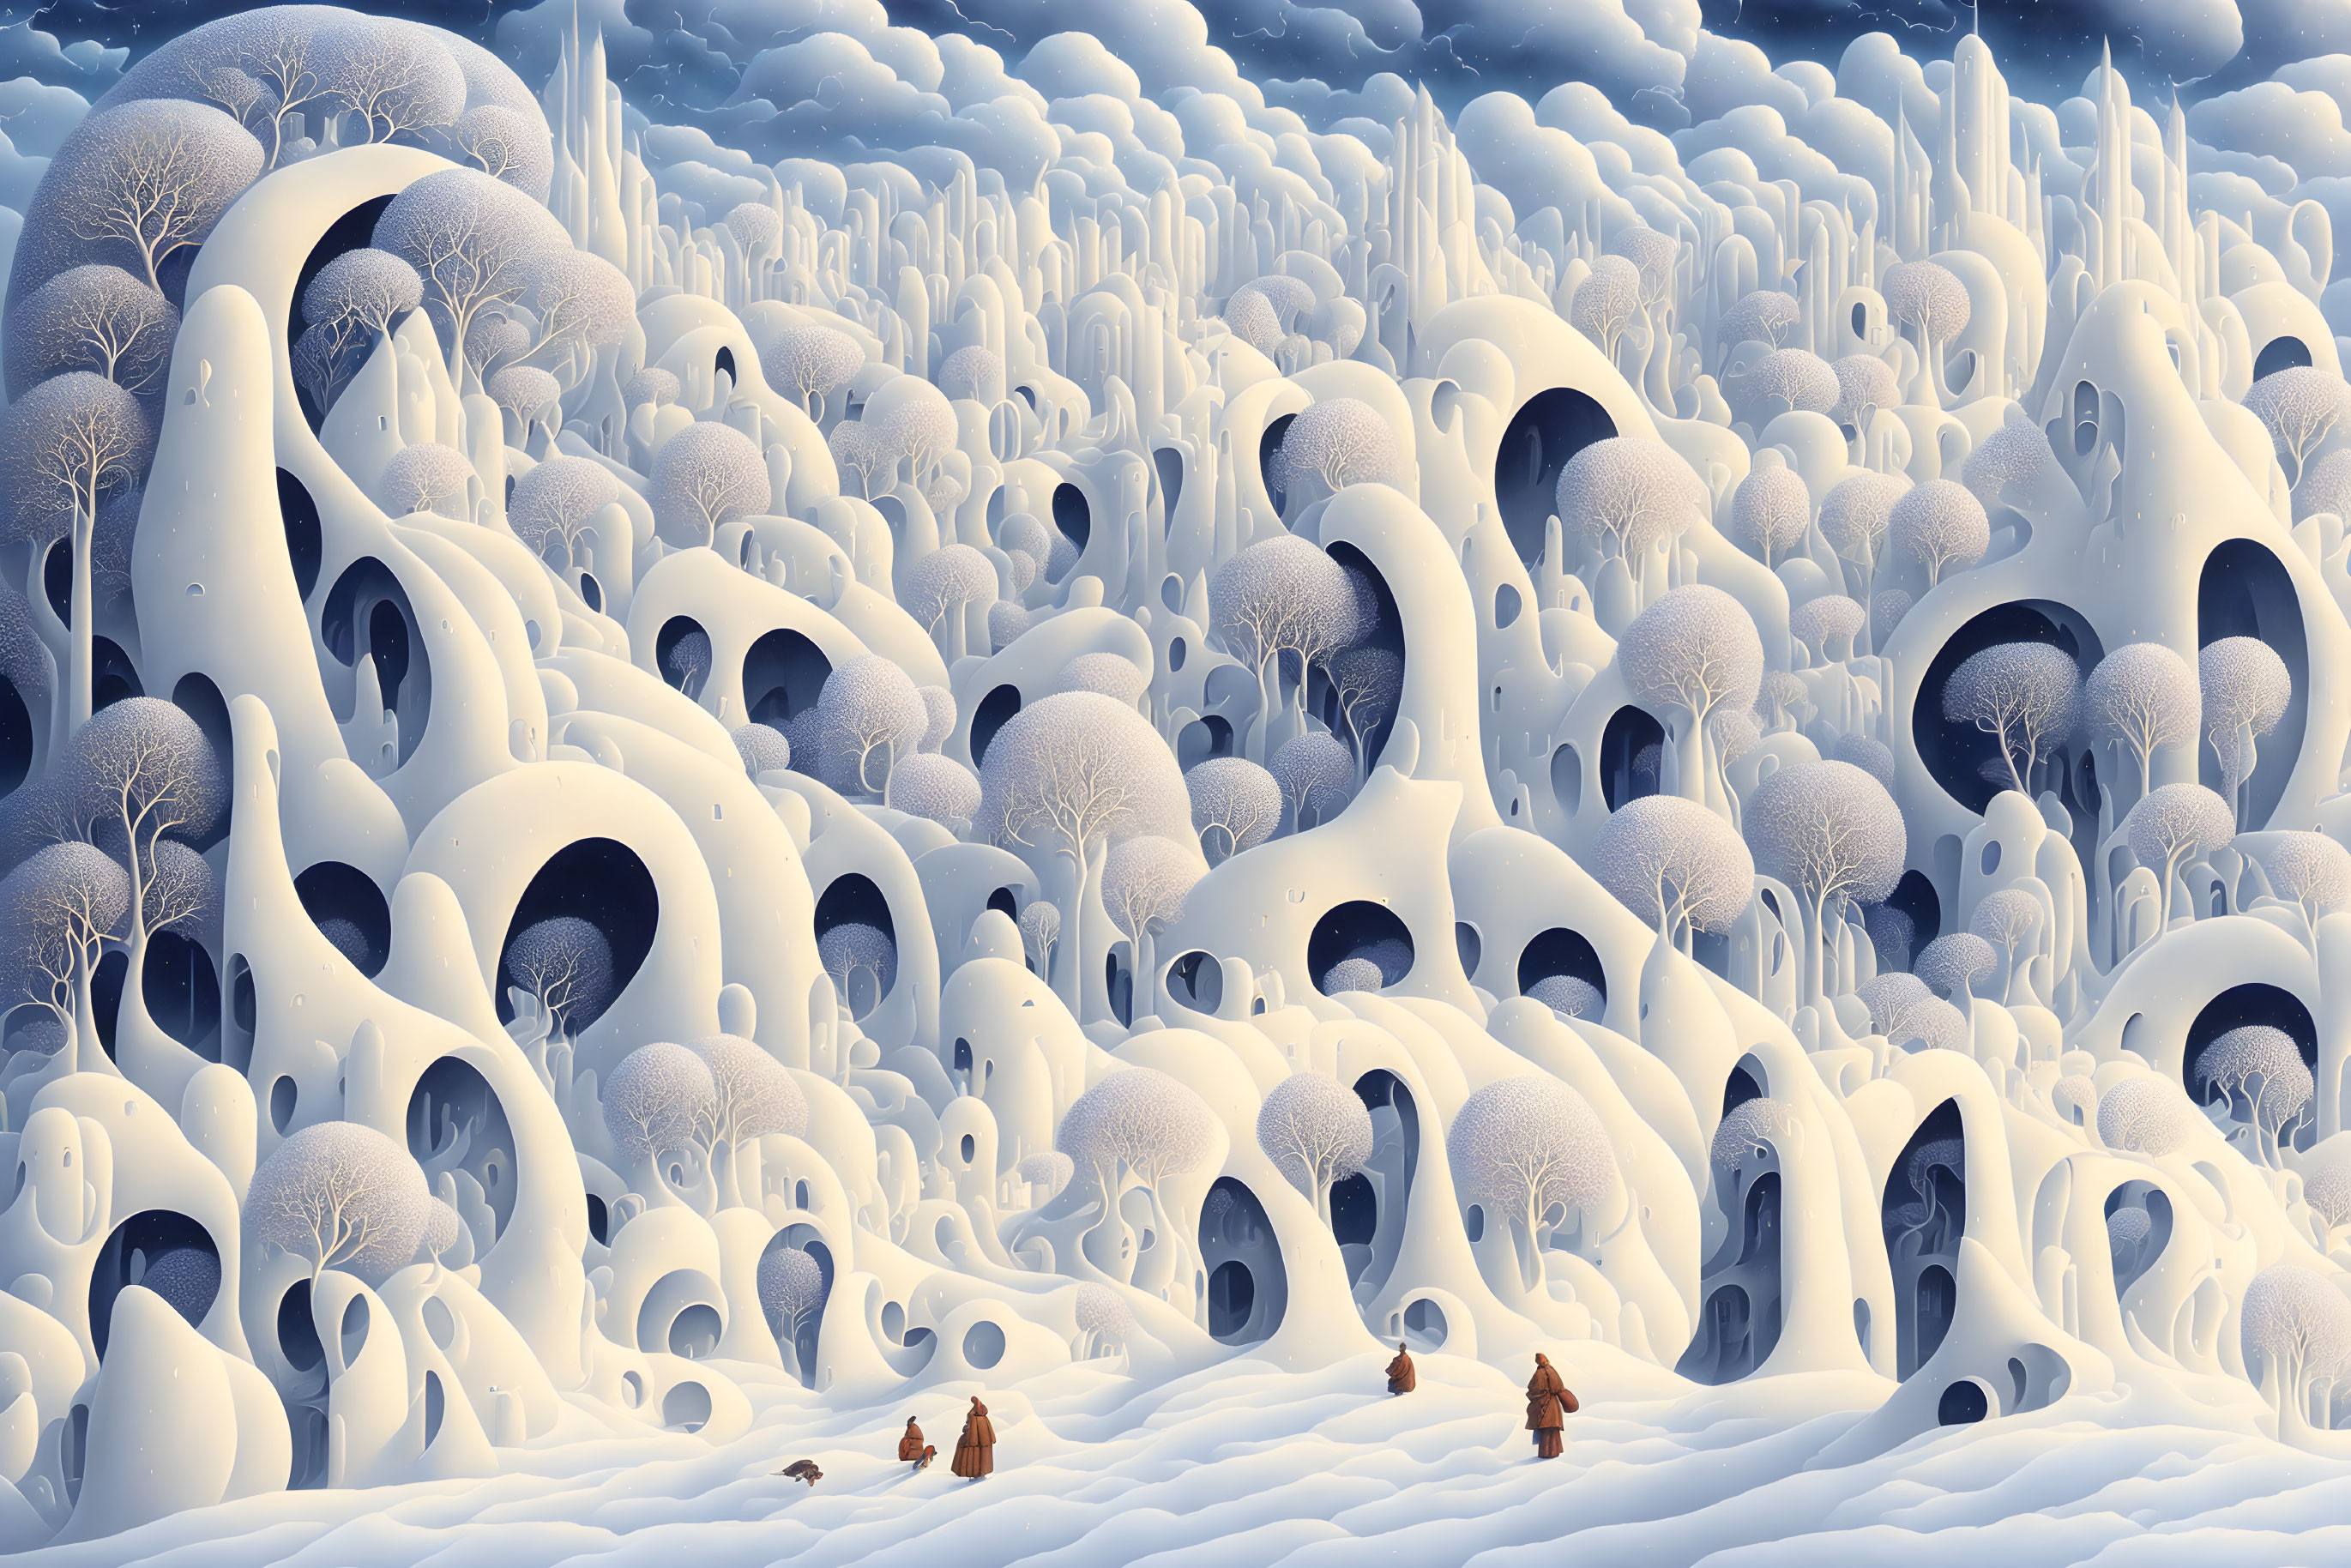 Small people in a huge surreal white landscape